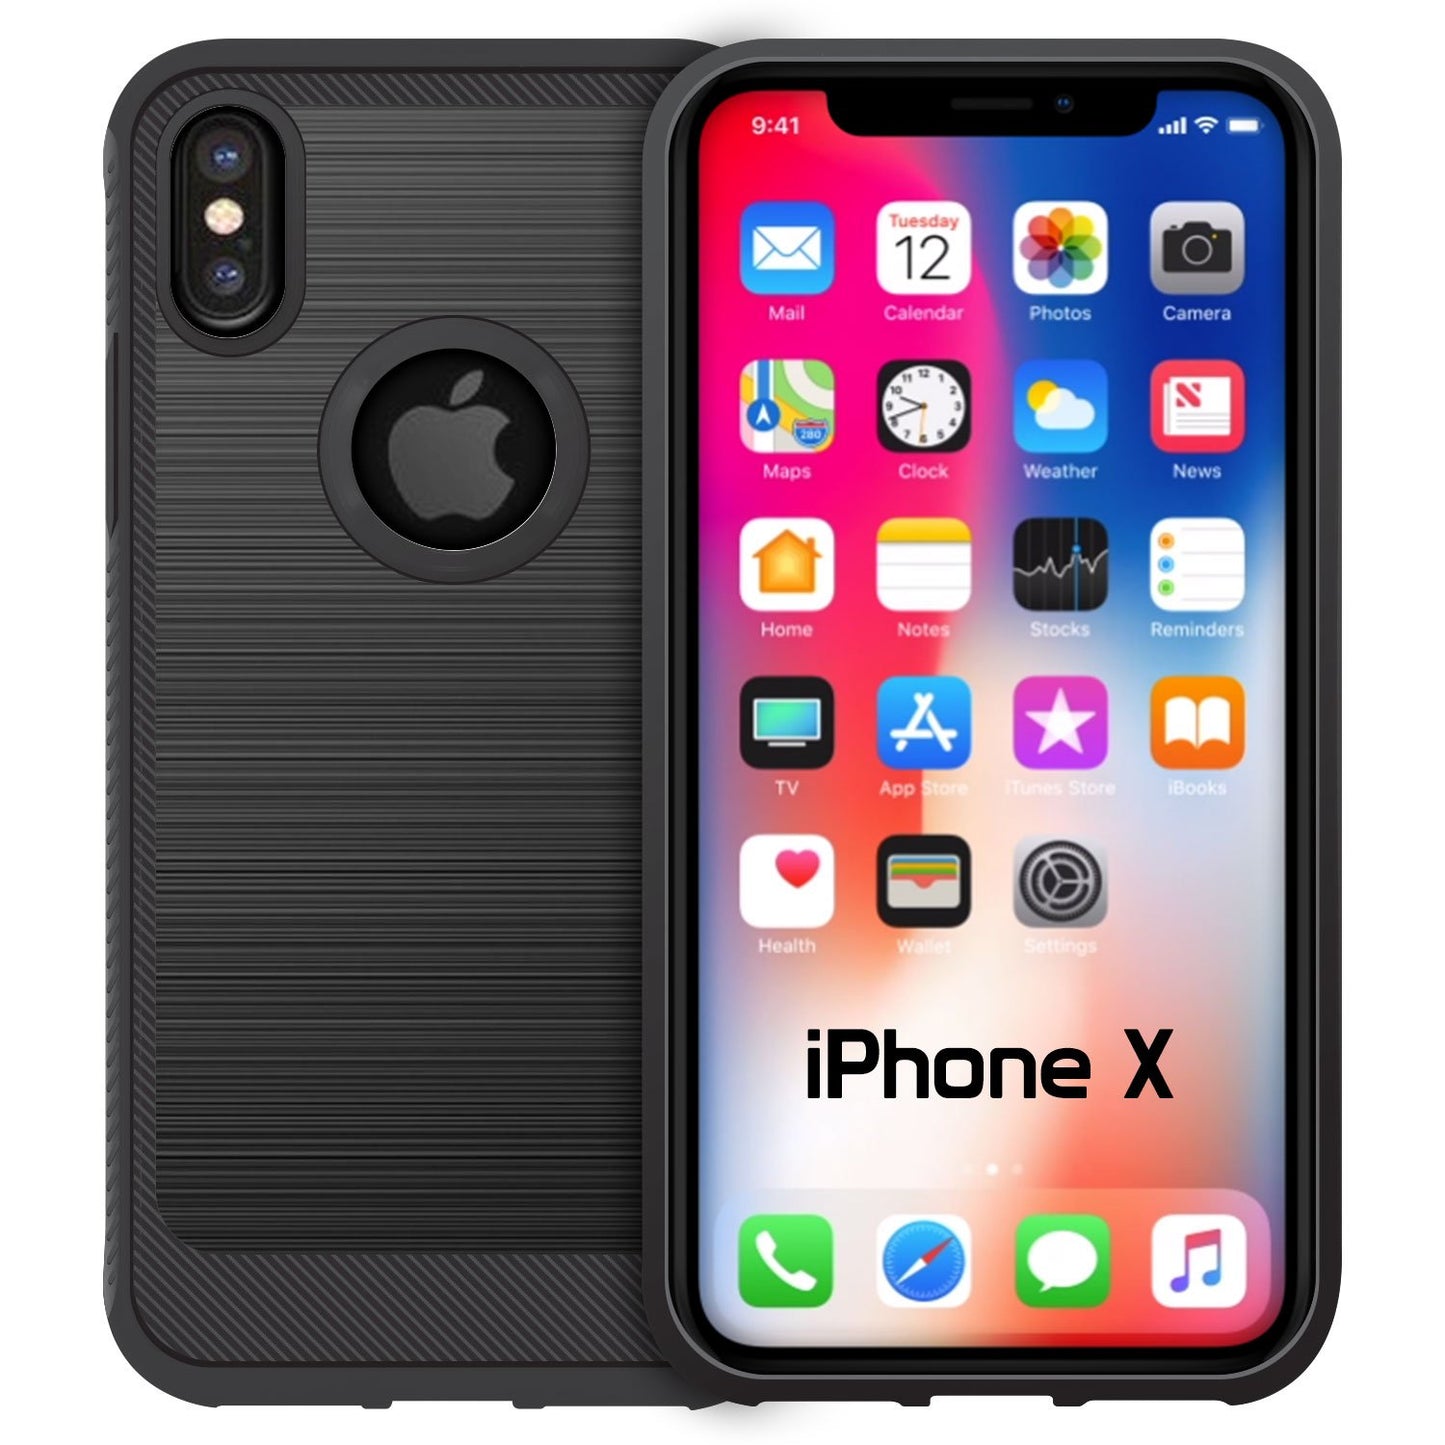 CCIPHXBK- Light Weight Heavy Duty Grip Protection Case - Black - iPhone X